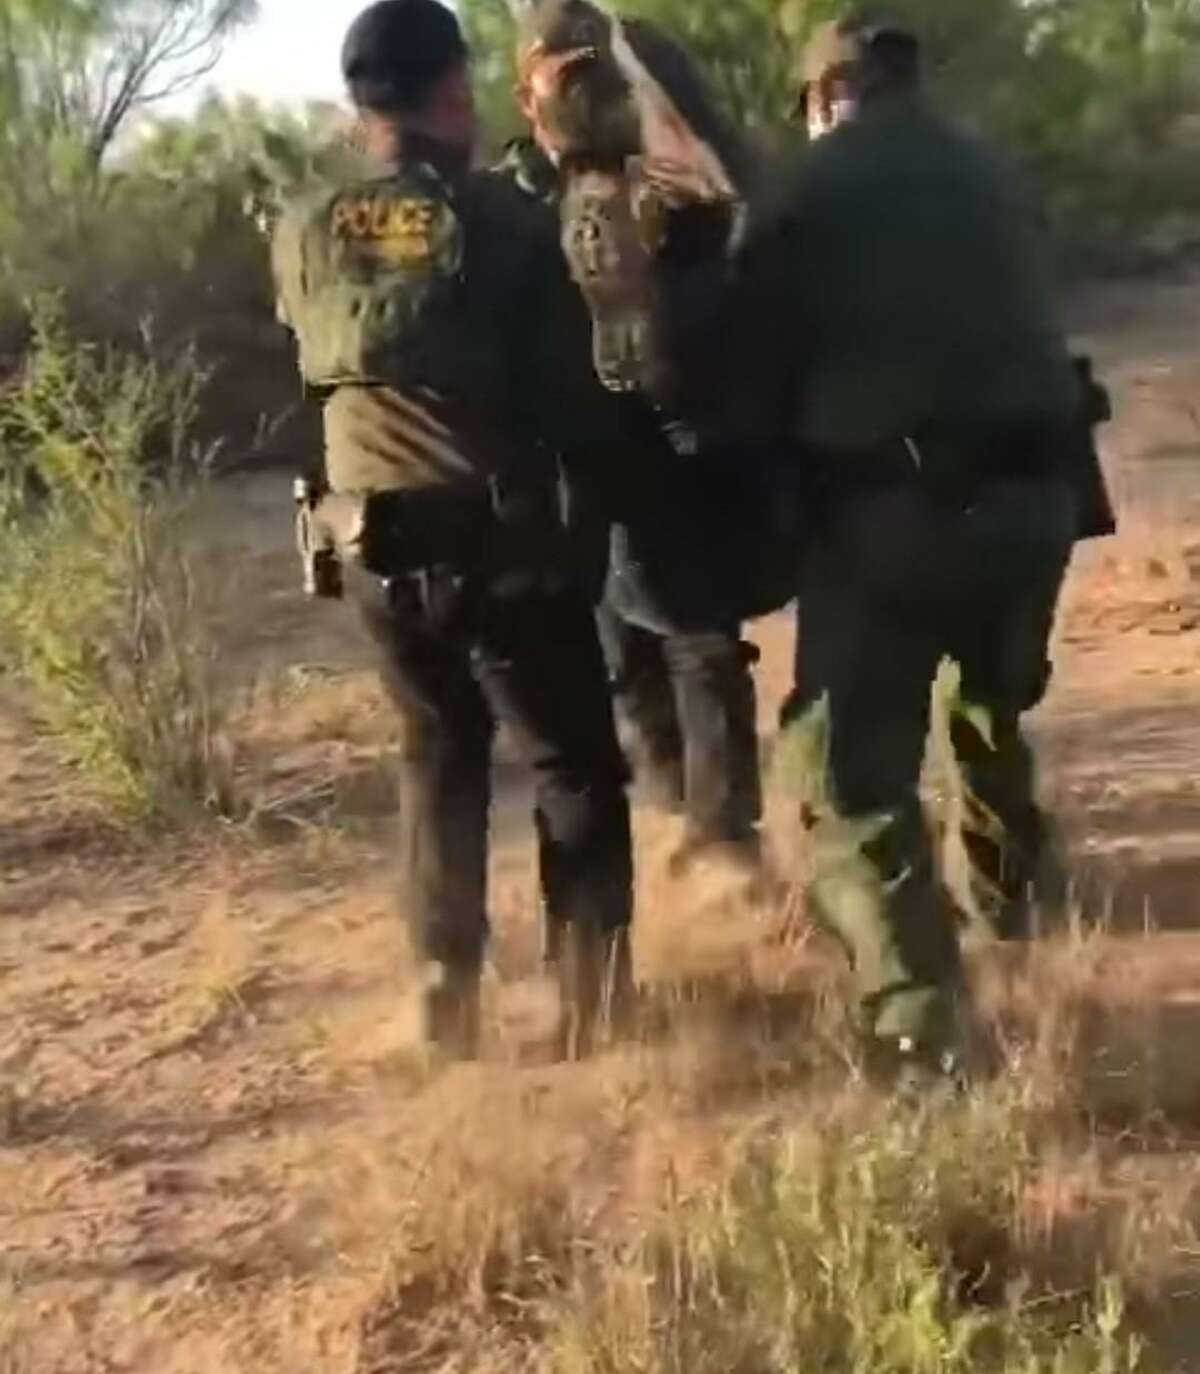 U.S. Border Patrol agents are seen carrying a woman out of the brush. She was determined to be an immigrant illegally present in the country who was suffering from severe dehydration.